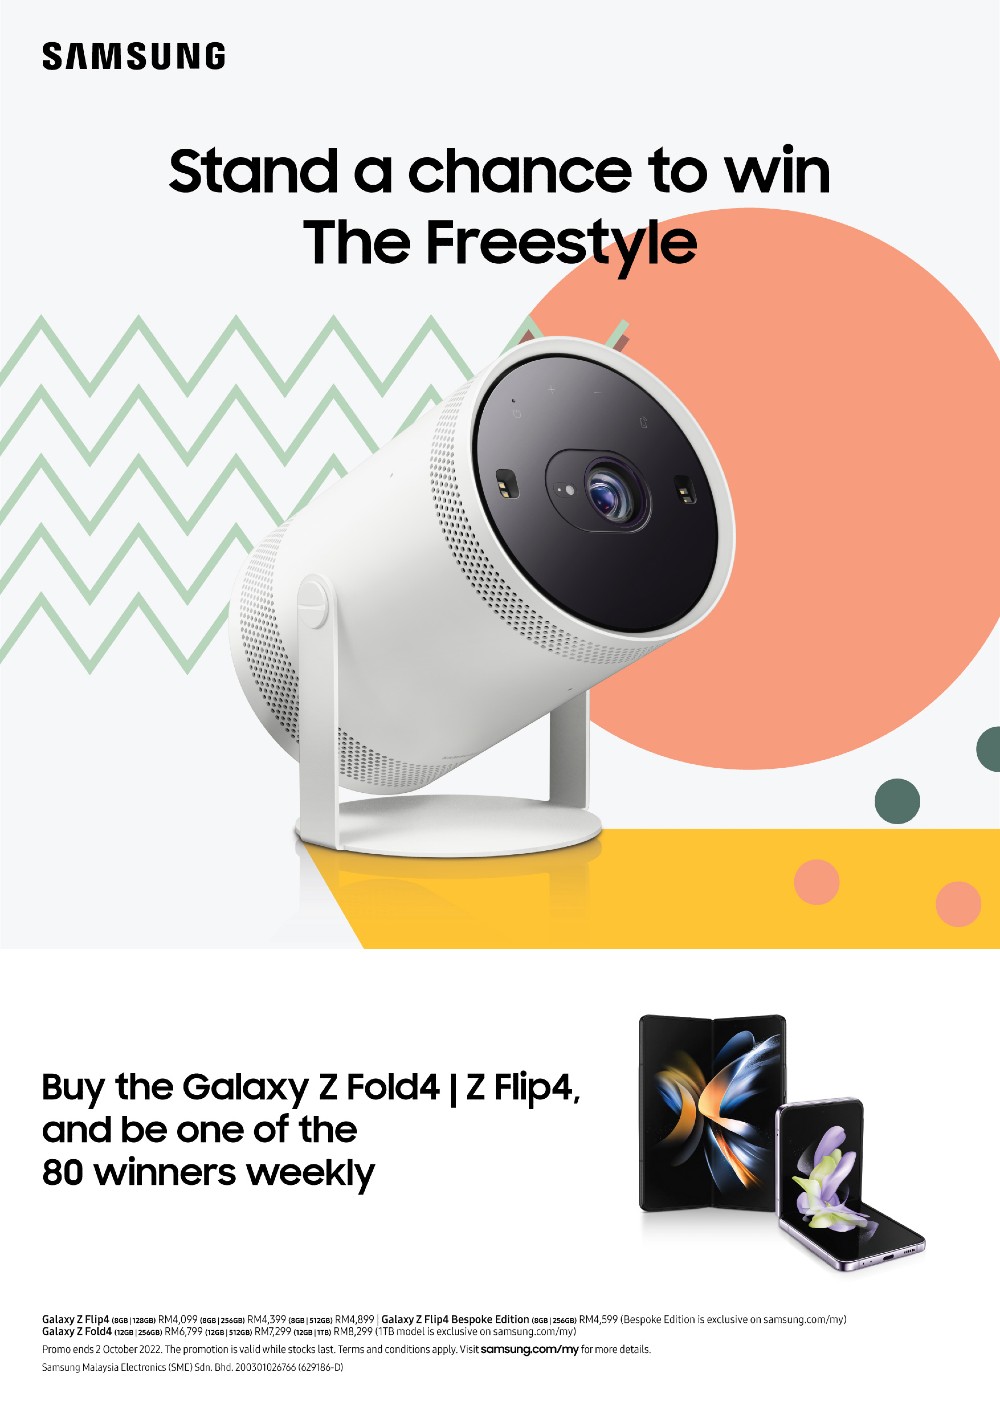 Get a Ghance to Win The Freestyle When You Purchase The New Galaxy Z Flip4 or Galaxy Z Fold4